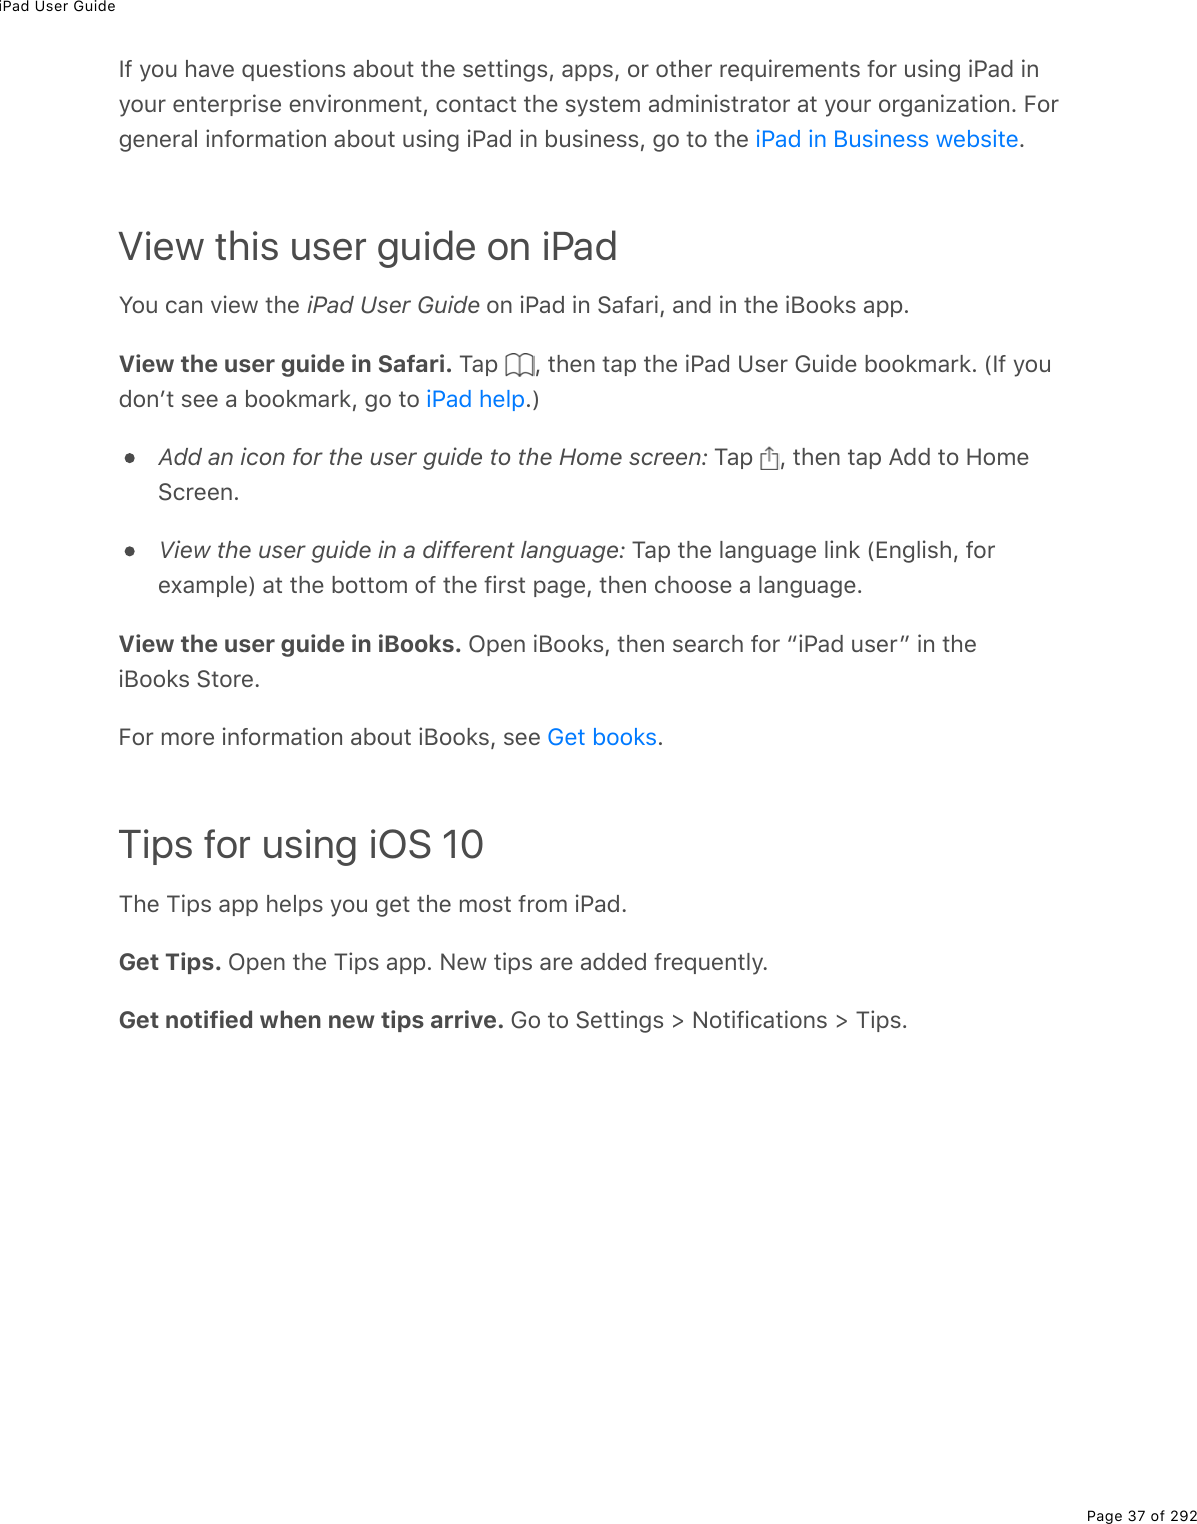 iPad User GuidePage 37 of 292If you have questions about the settings, apps, or other requirements for using iPad inyour enterprise environment, contact the system administrator at your organization. Forgeneral information about using iPad in business, go to the  .View this user guide on iPadYou can view the iPad User Guide on iPad in Safari, and in the iBooks app.View the user guide in Safari. Tap  , then tap the iPad User Guide bookmark. (If youdonʼt see a bookmark, go to  .)Add an icon for the user guide to the Home screen: Tap  , then tap Add to HomeScreen.View the user guide in a different language: Tap the language link (English, forexample) at the bottom of the first page, then choose a language.View the user guide in iBooks. Open iBooks, then search for “iPad user” in theiBooks Store.For more information about iBooks, see  .Tips for using iOS 10The Tips app helps you get the most from iPad.Get Tips. Open the Tips app. New tips are added frequently.Get notified when new tips arrive. Go to Settings &gt; Notifications &gt; Tips.iPad in Business websiteiPad helpGet books